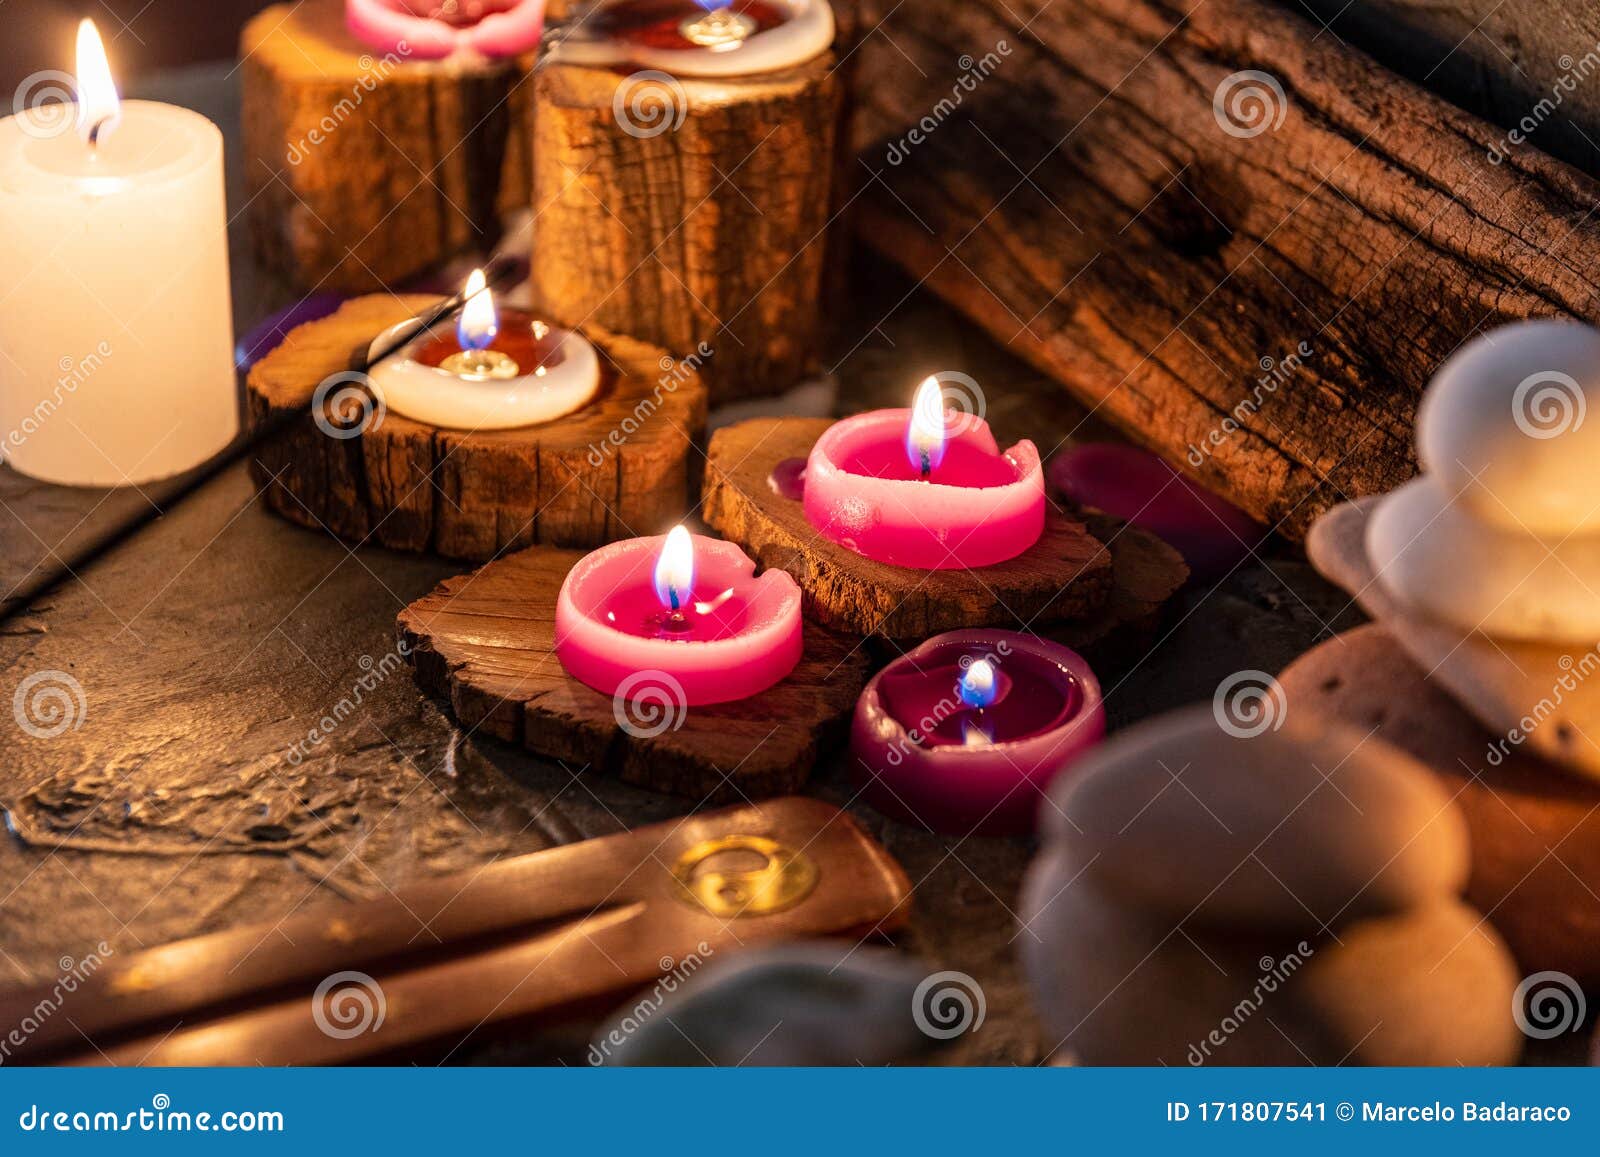 lighted candles with ornate wood and scented and energetic incense